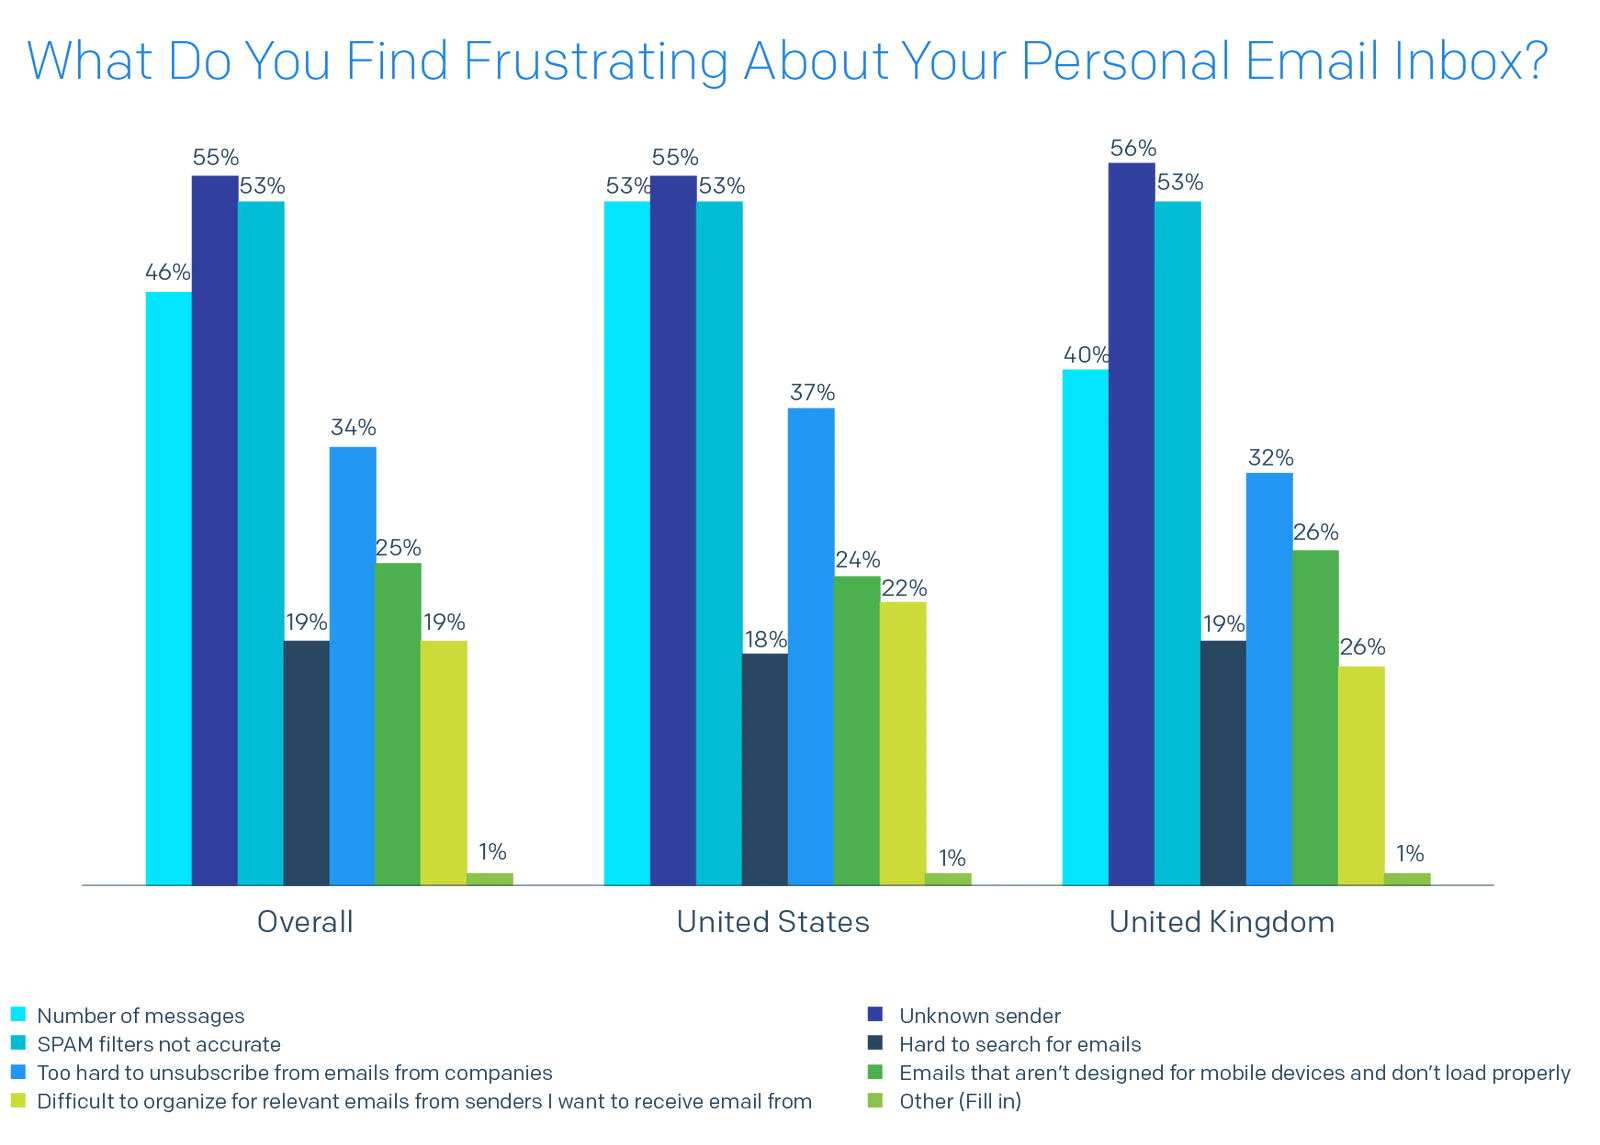 Bar chart of What Do You Find Frustrating About Your Personal Email Inbox?